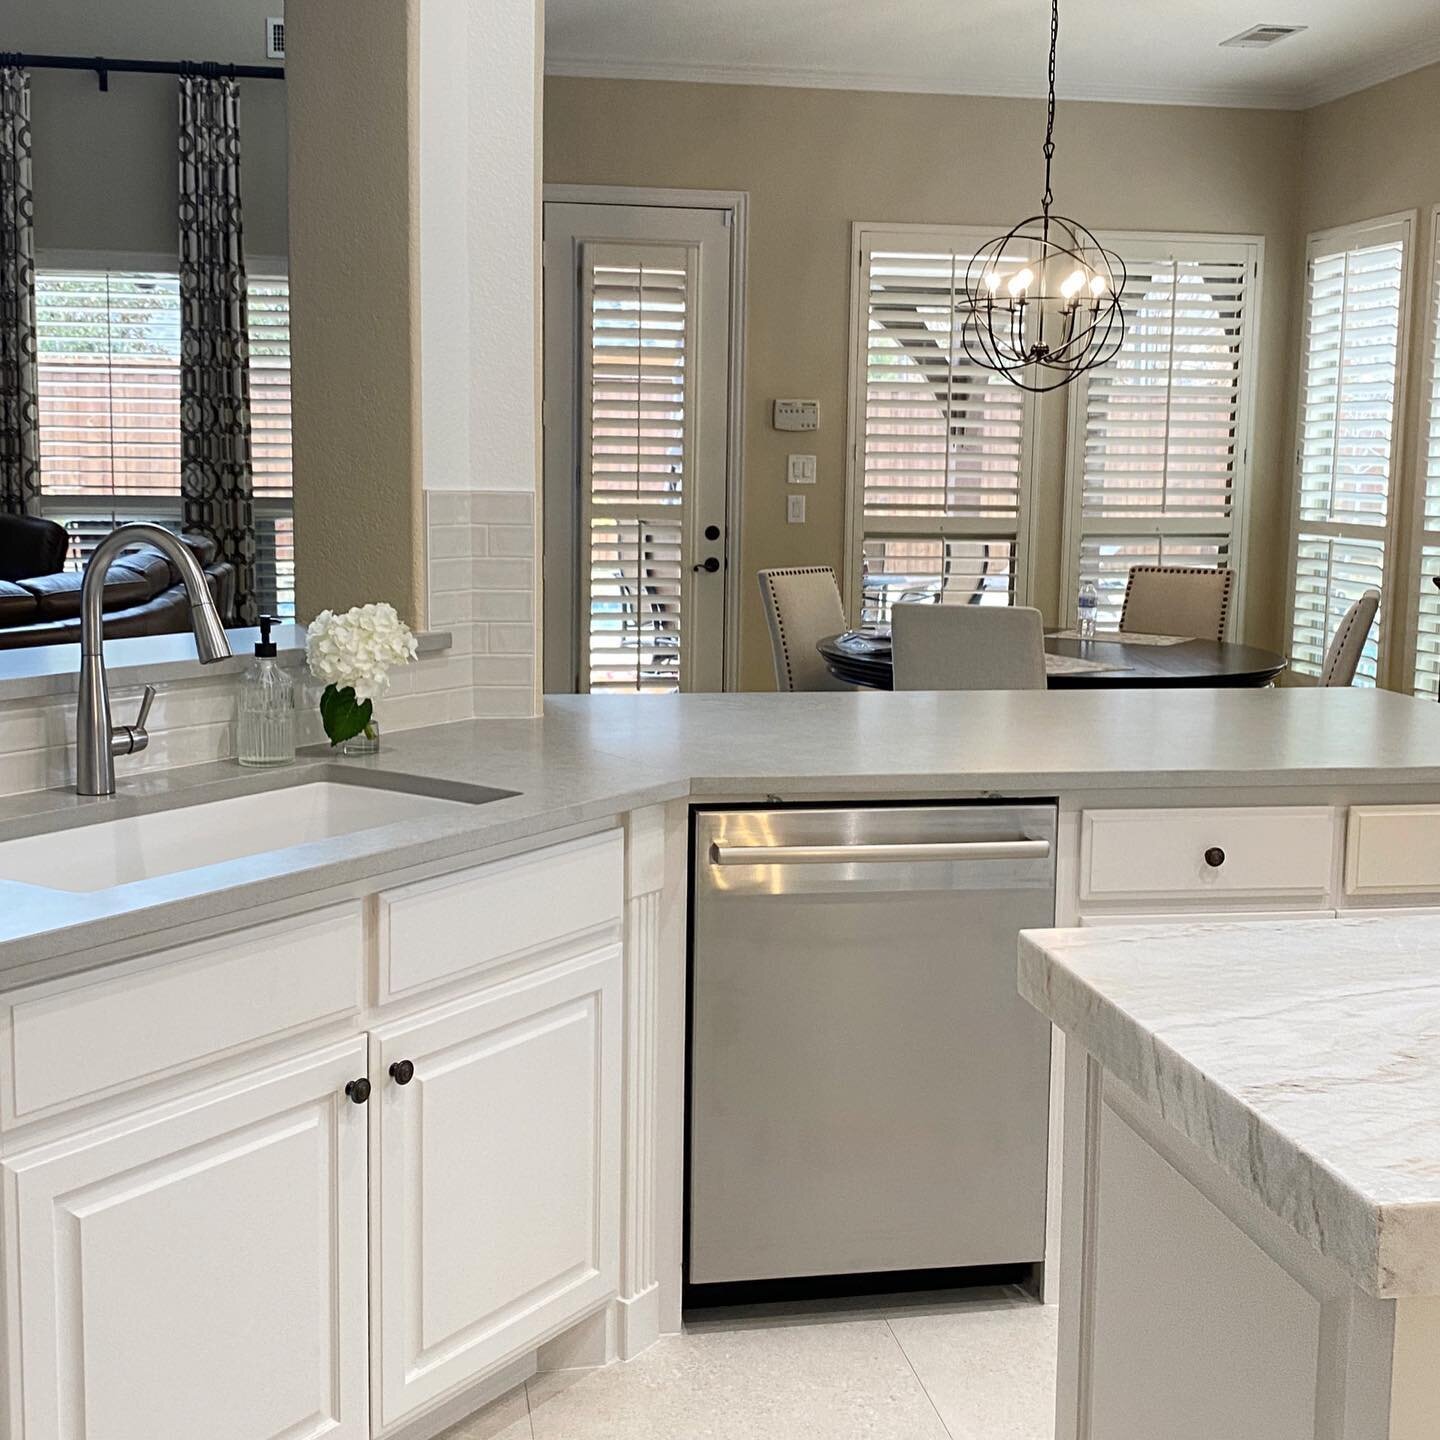 In this simple refresh, we eliminated the dated arched openings by squaring them off allowing for the opening to be larger.  And did you notice the overhang?  Once disconnected from the breakfast room, simply lowering the overhang connects the space 